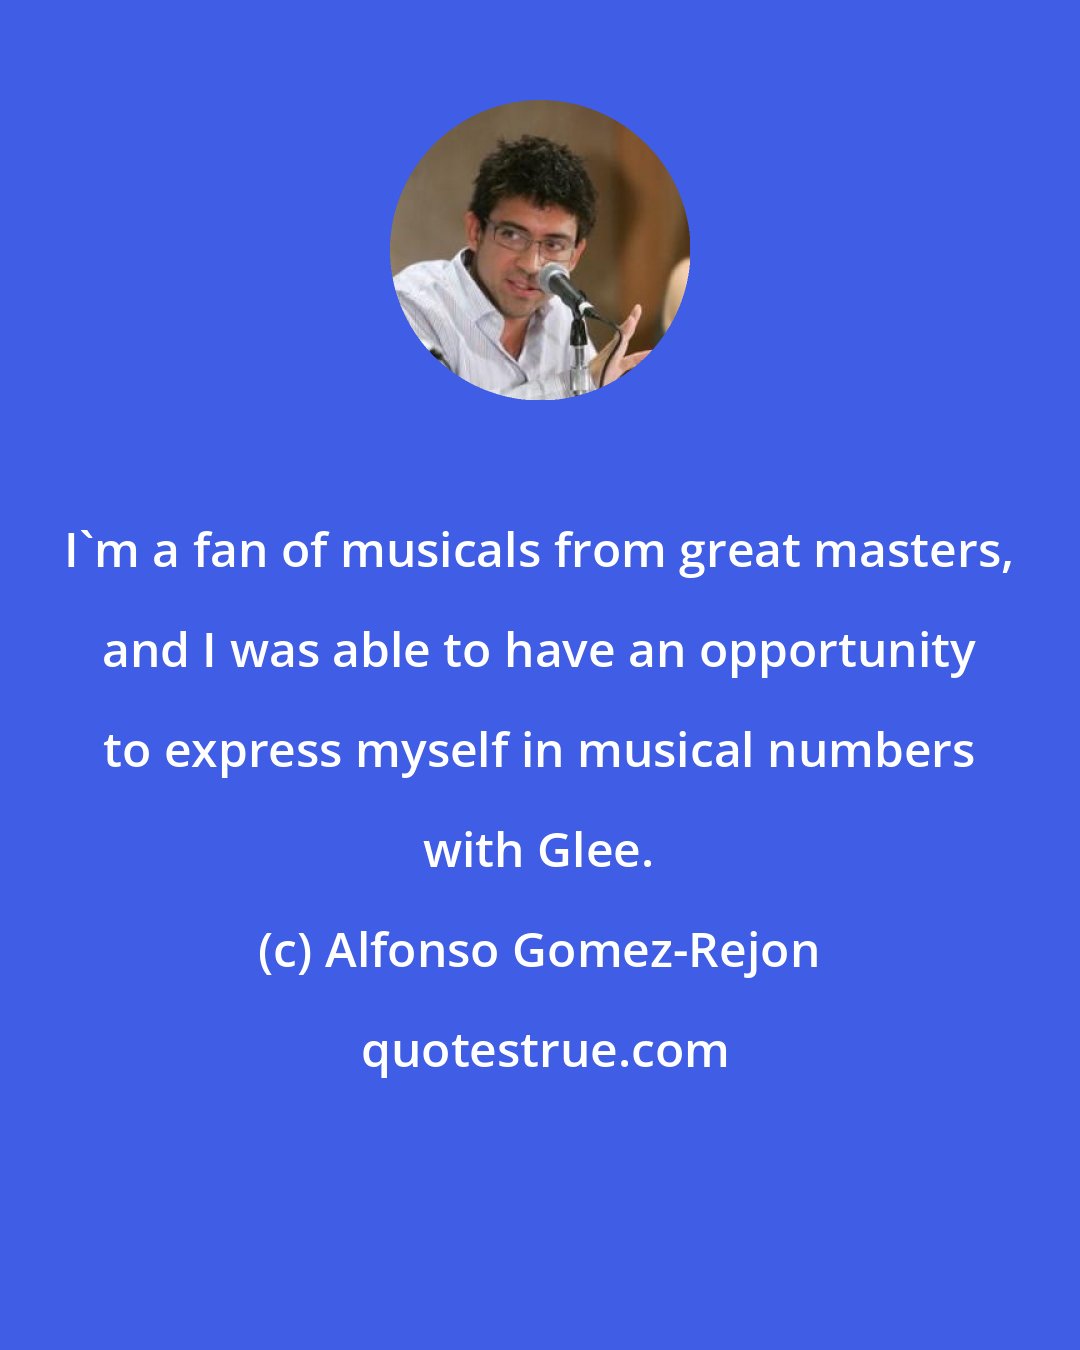 Alfonso Gomez-Rejon: I'm a fan of musicals from great masters, and I was able to have an opportunity to express myself in musical numbers with Glee.